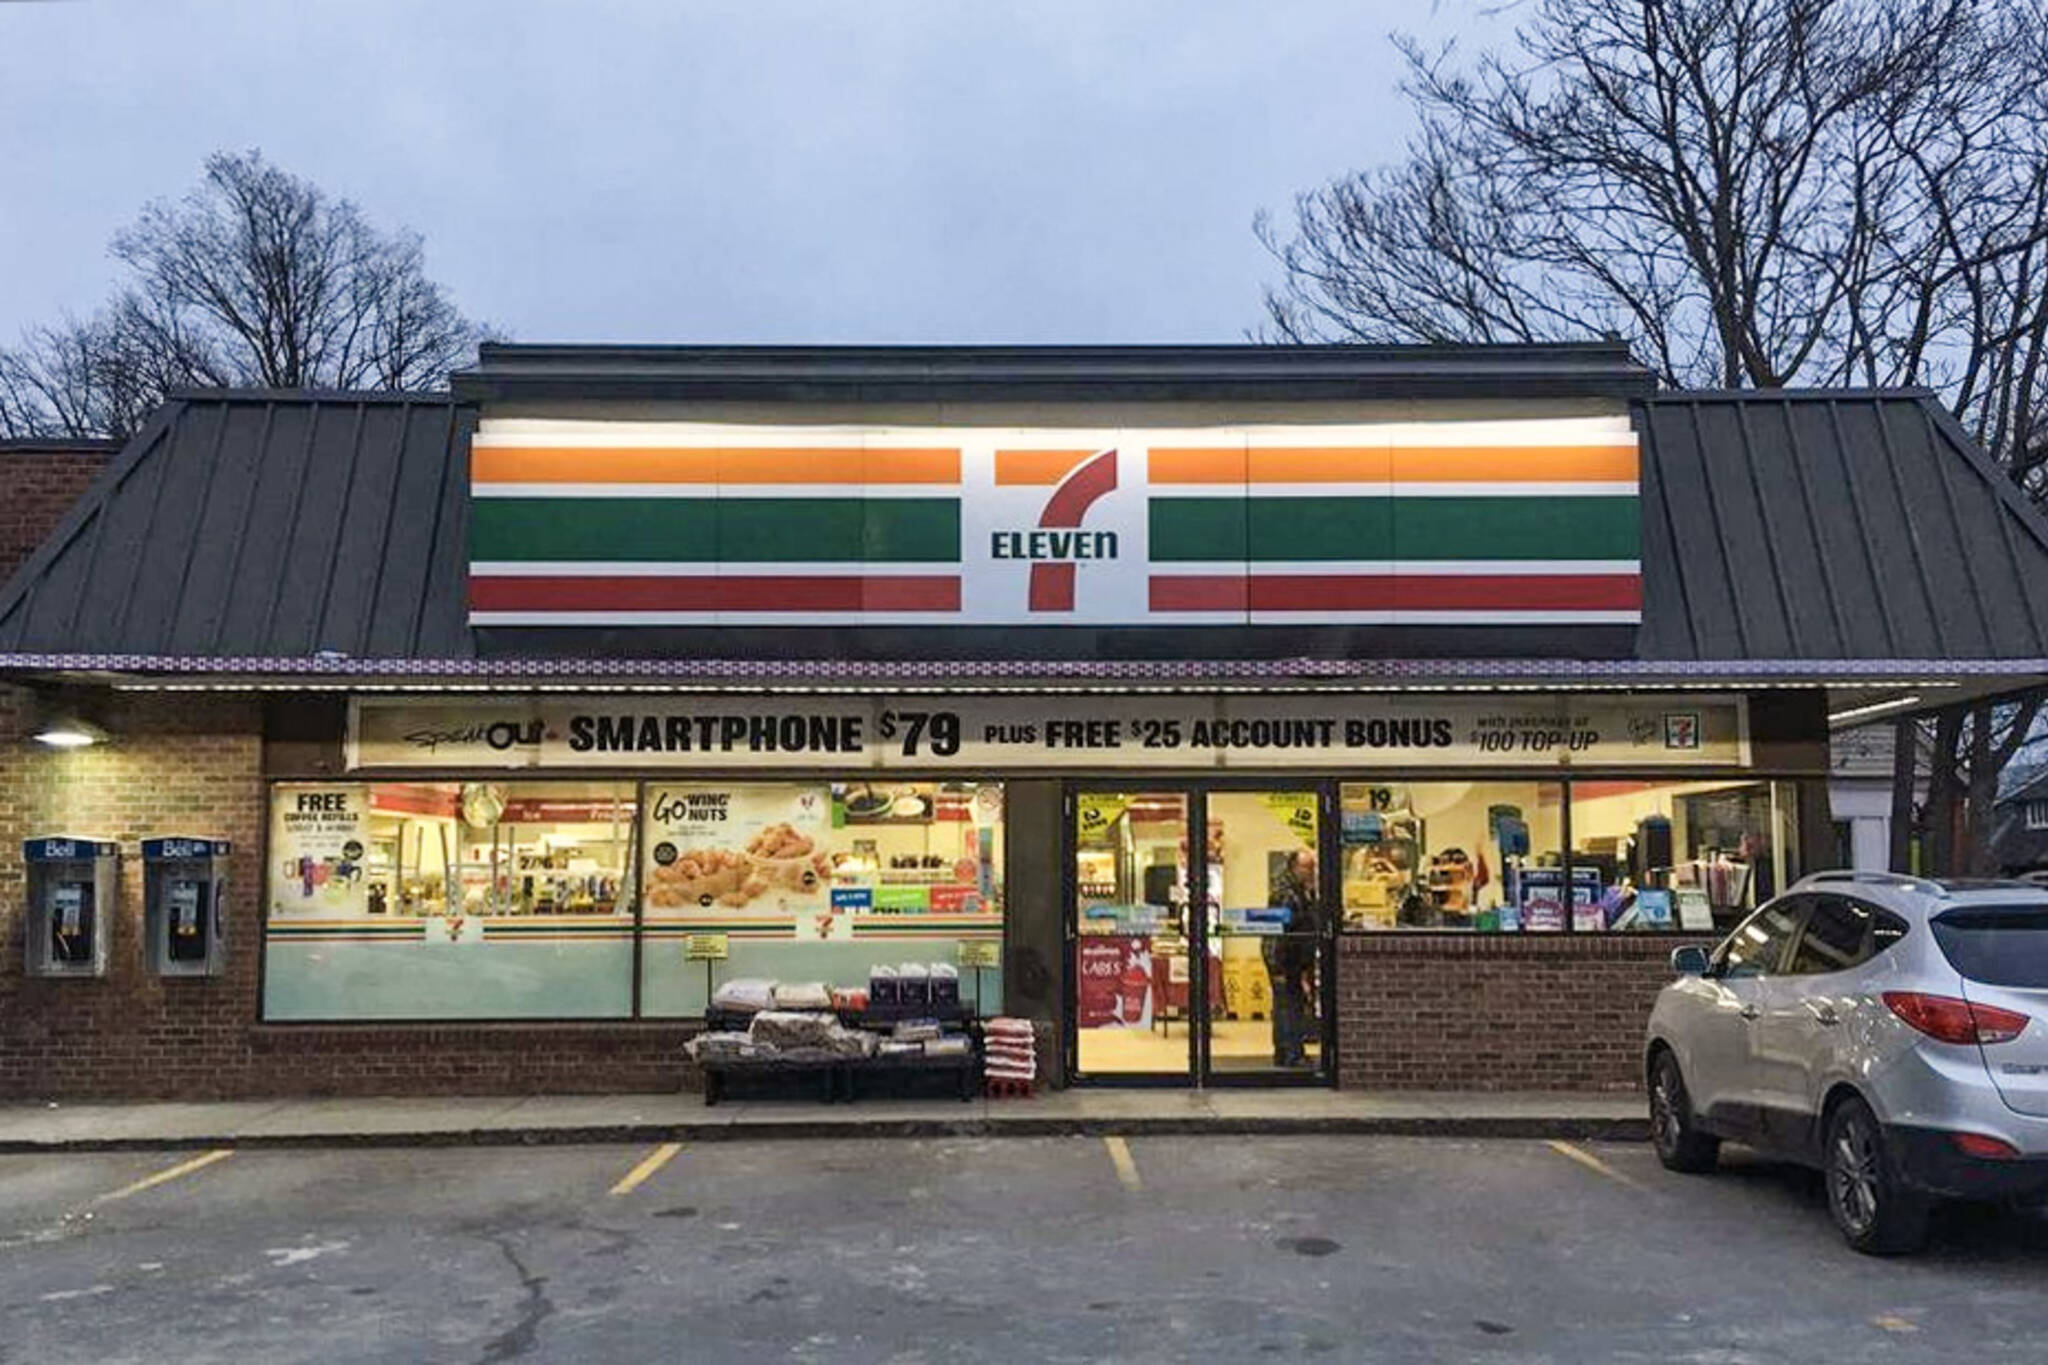 7Eleven just applied to serve alcohol inside 61 stores across Ontario